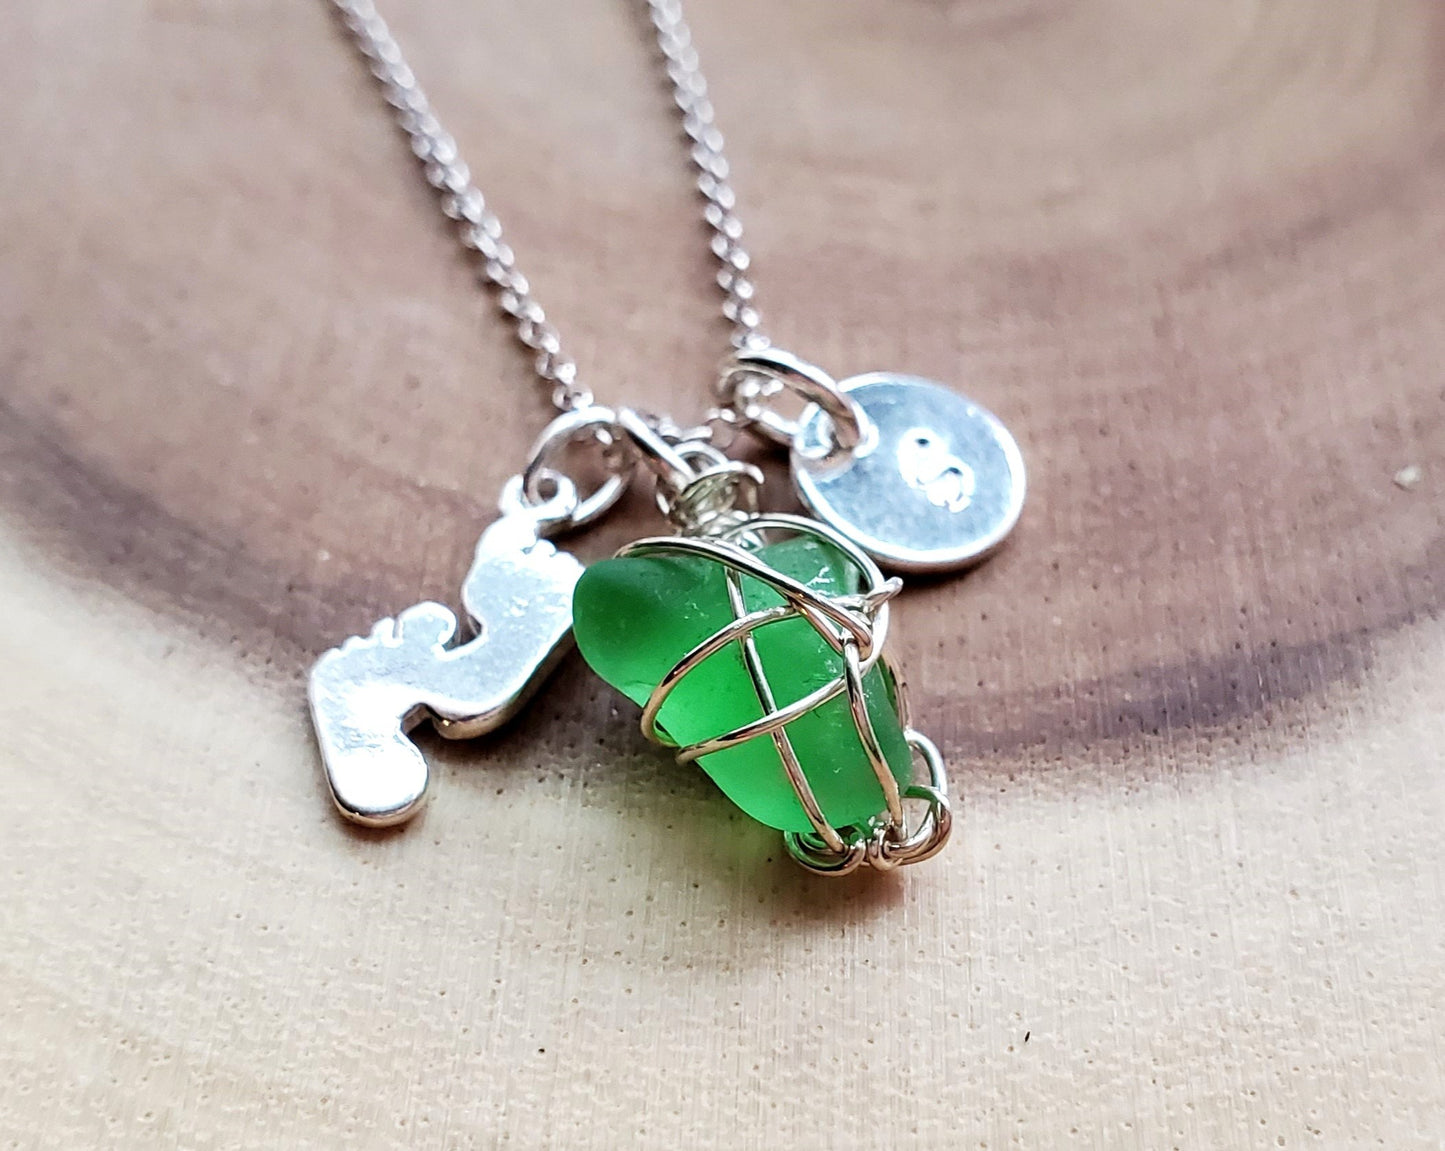 Personalized Footprints in the Sand Green Beach Glass Necklace, made with Sterling Silver, an Initial Pendant, Footprints pendant and a wire wrapped green Beach Glass pendant. 